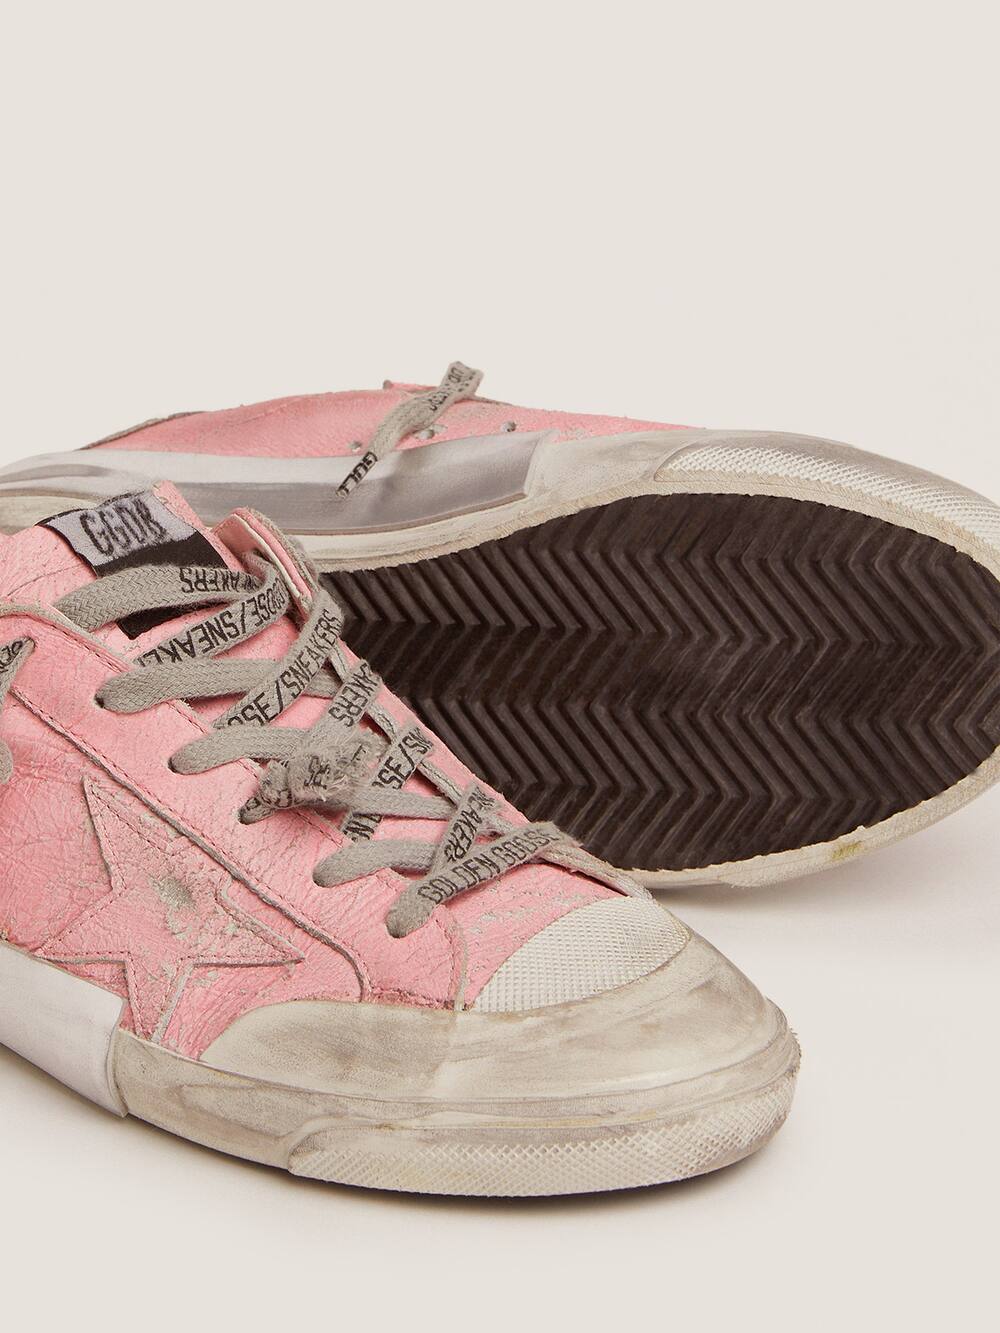 Golden Goose - Super-Star sneakers in pink crackled leather and multi-foxing in 